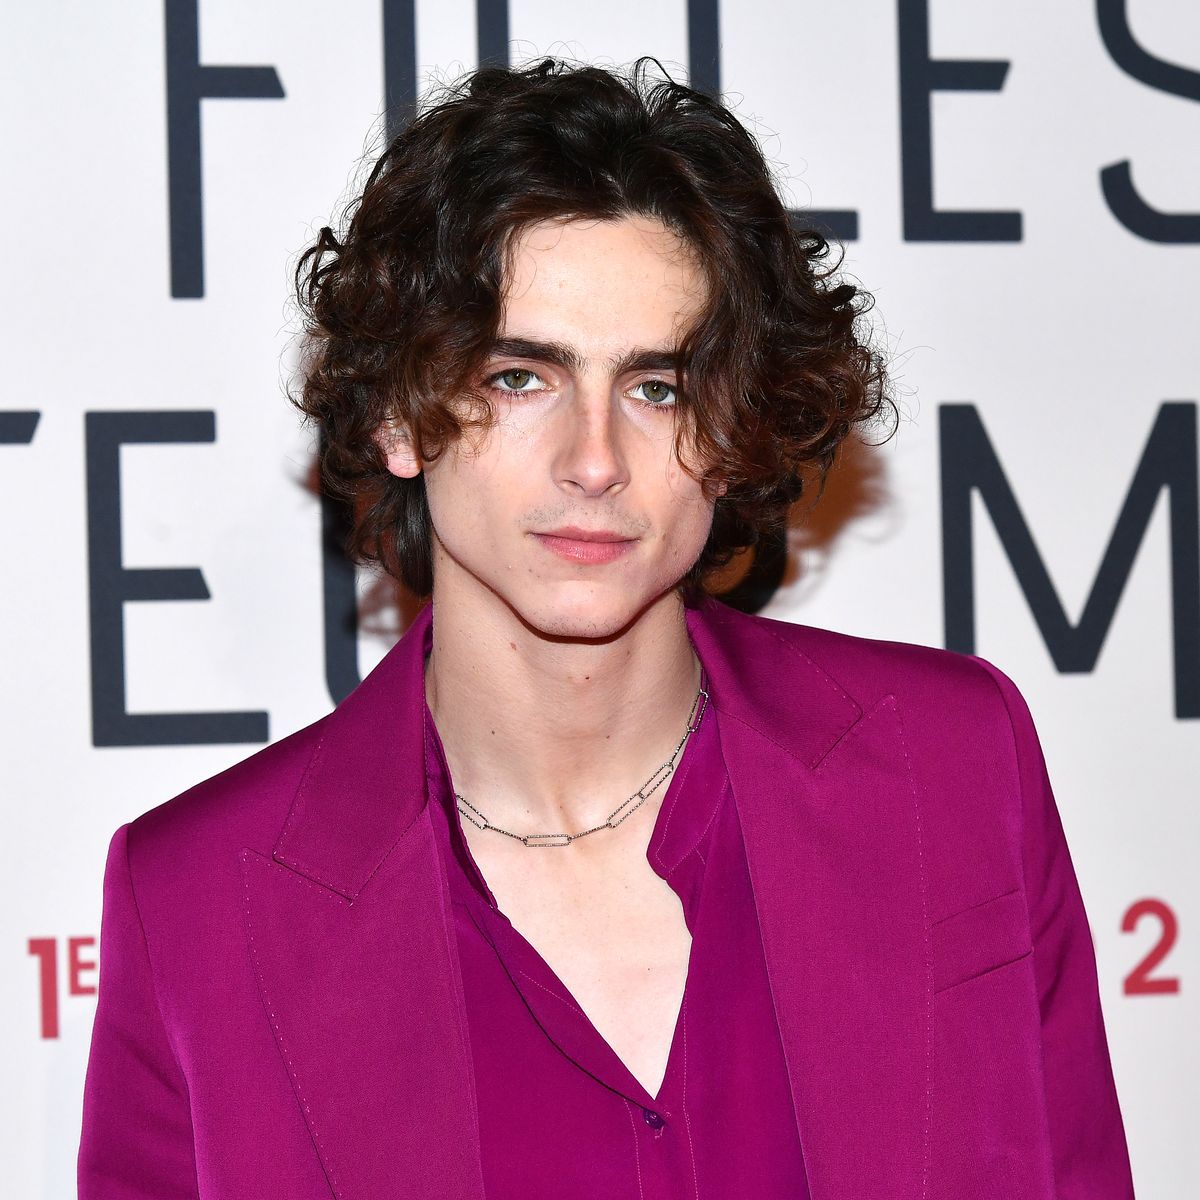 Whats The Deal With Timothee Chalamet Paris Keychain?